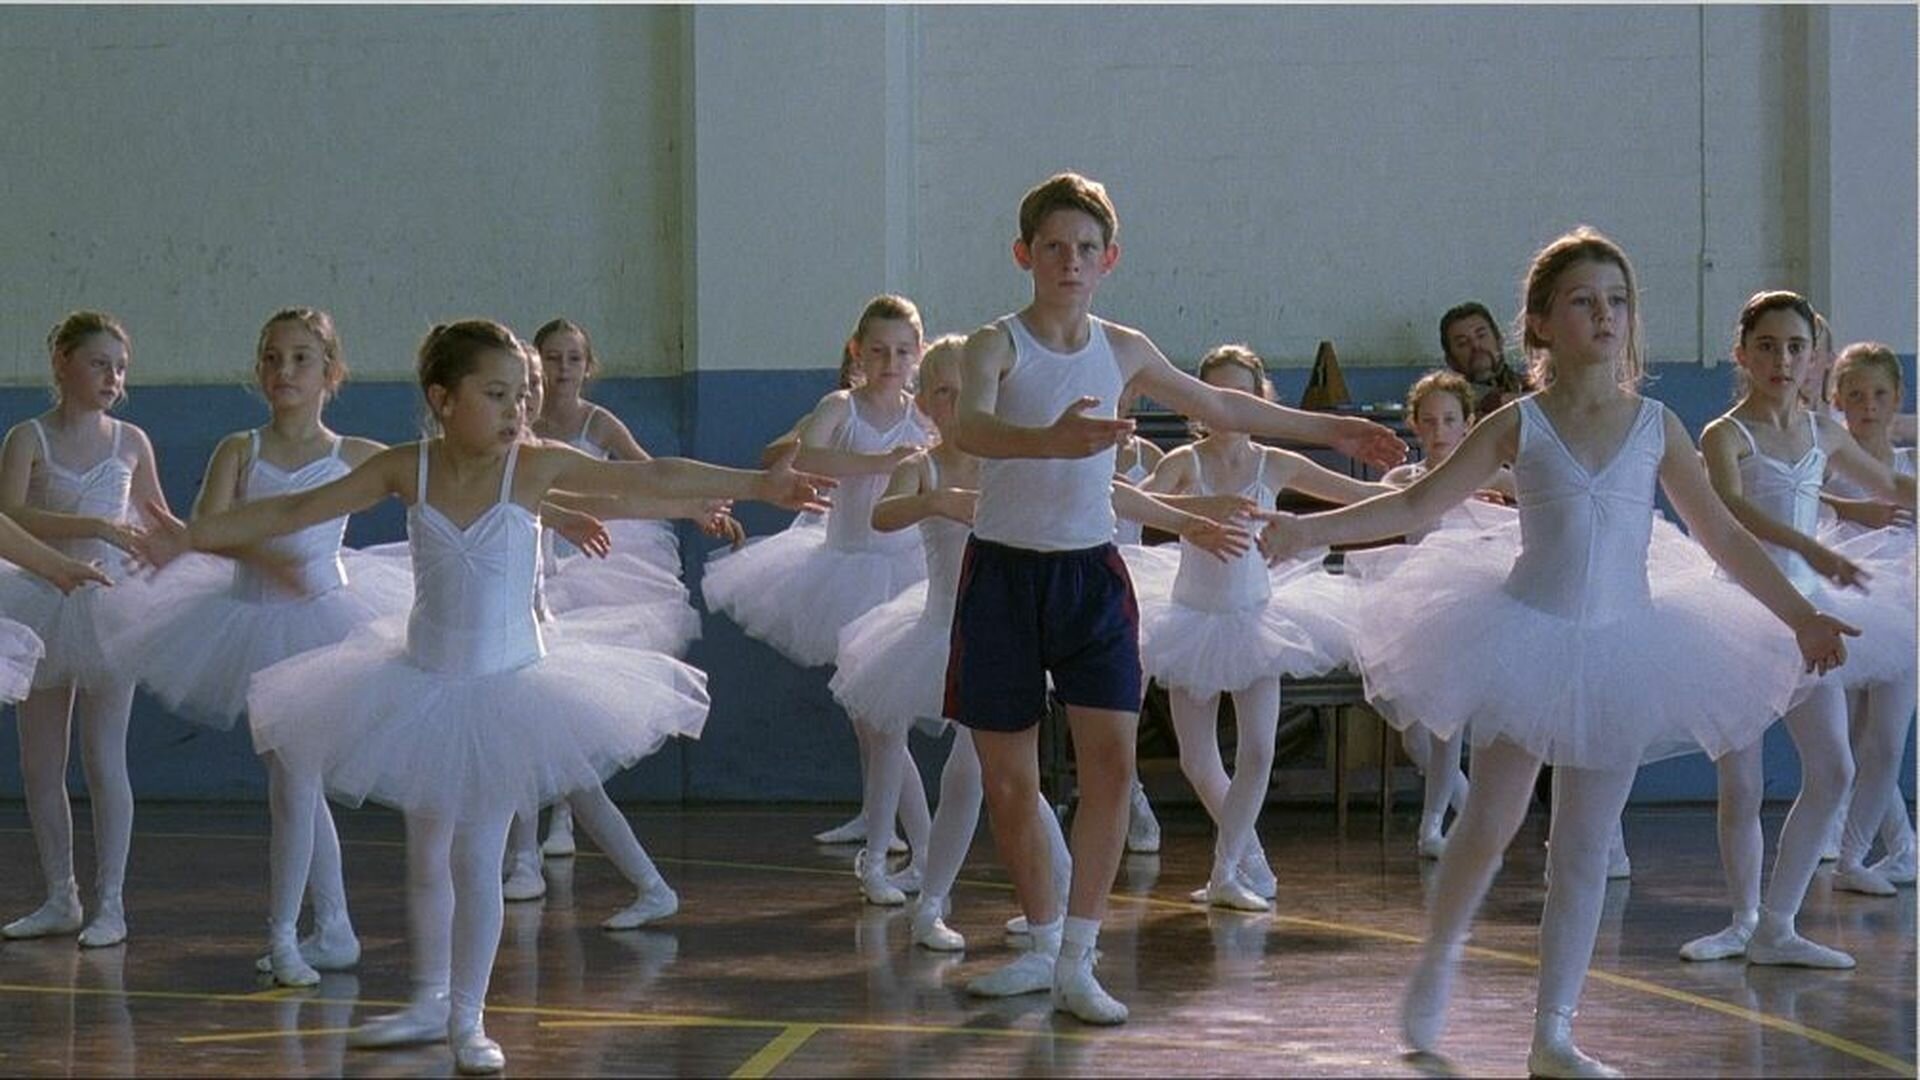 A young boy dances with a group of young girls dressed in ballet clothes